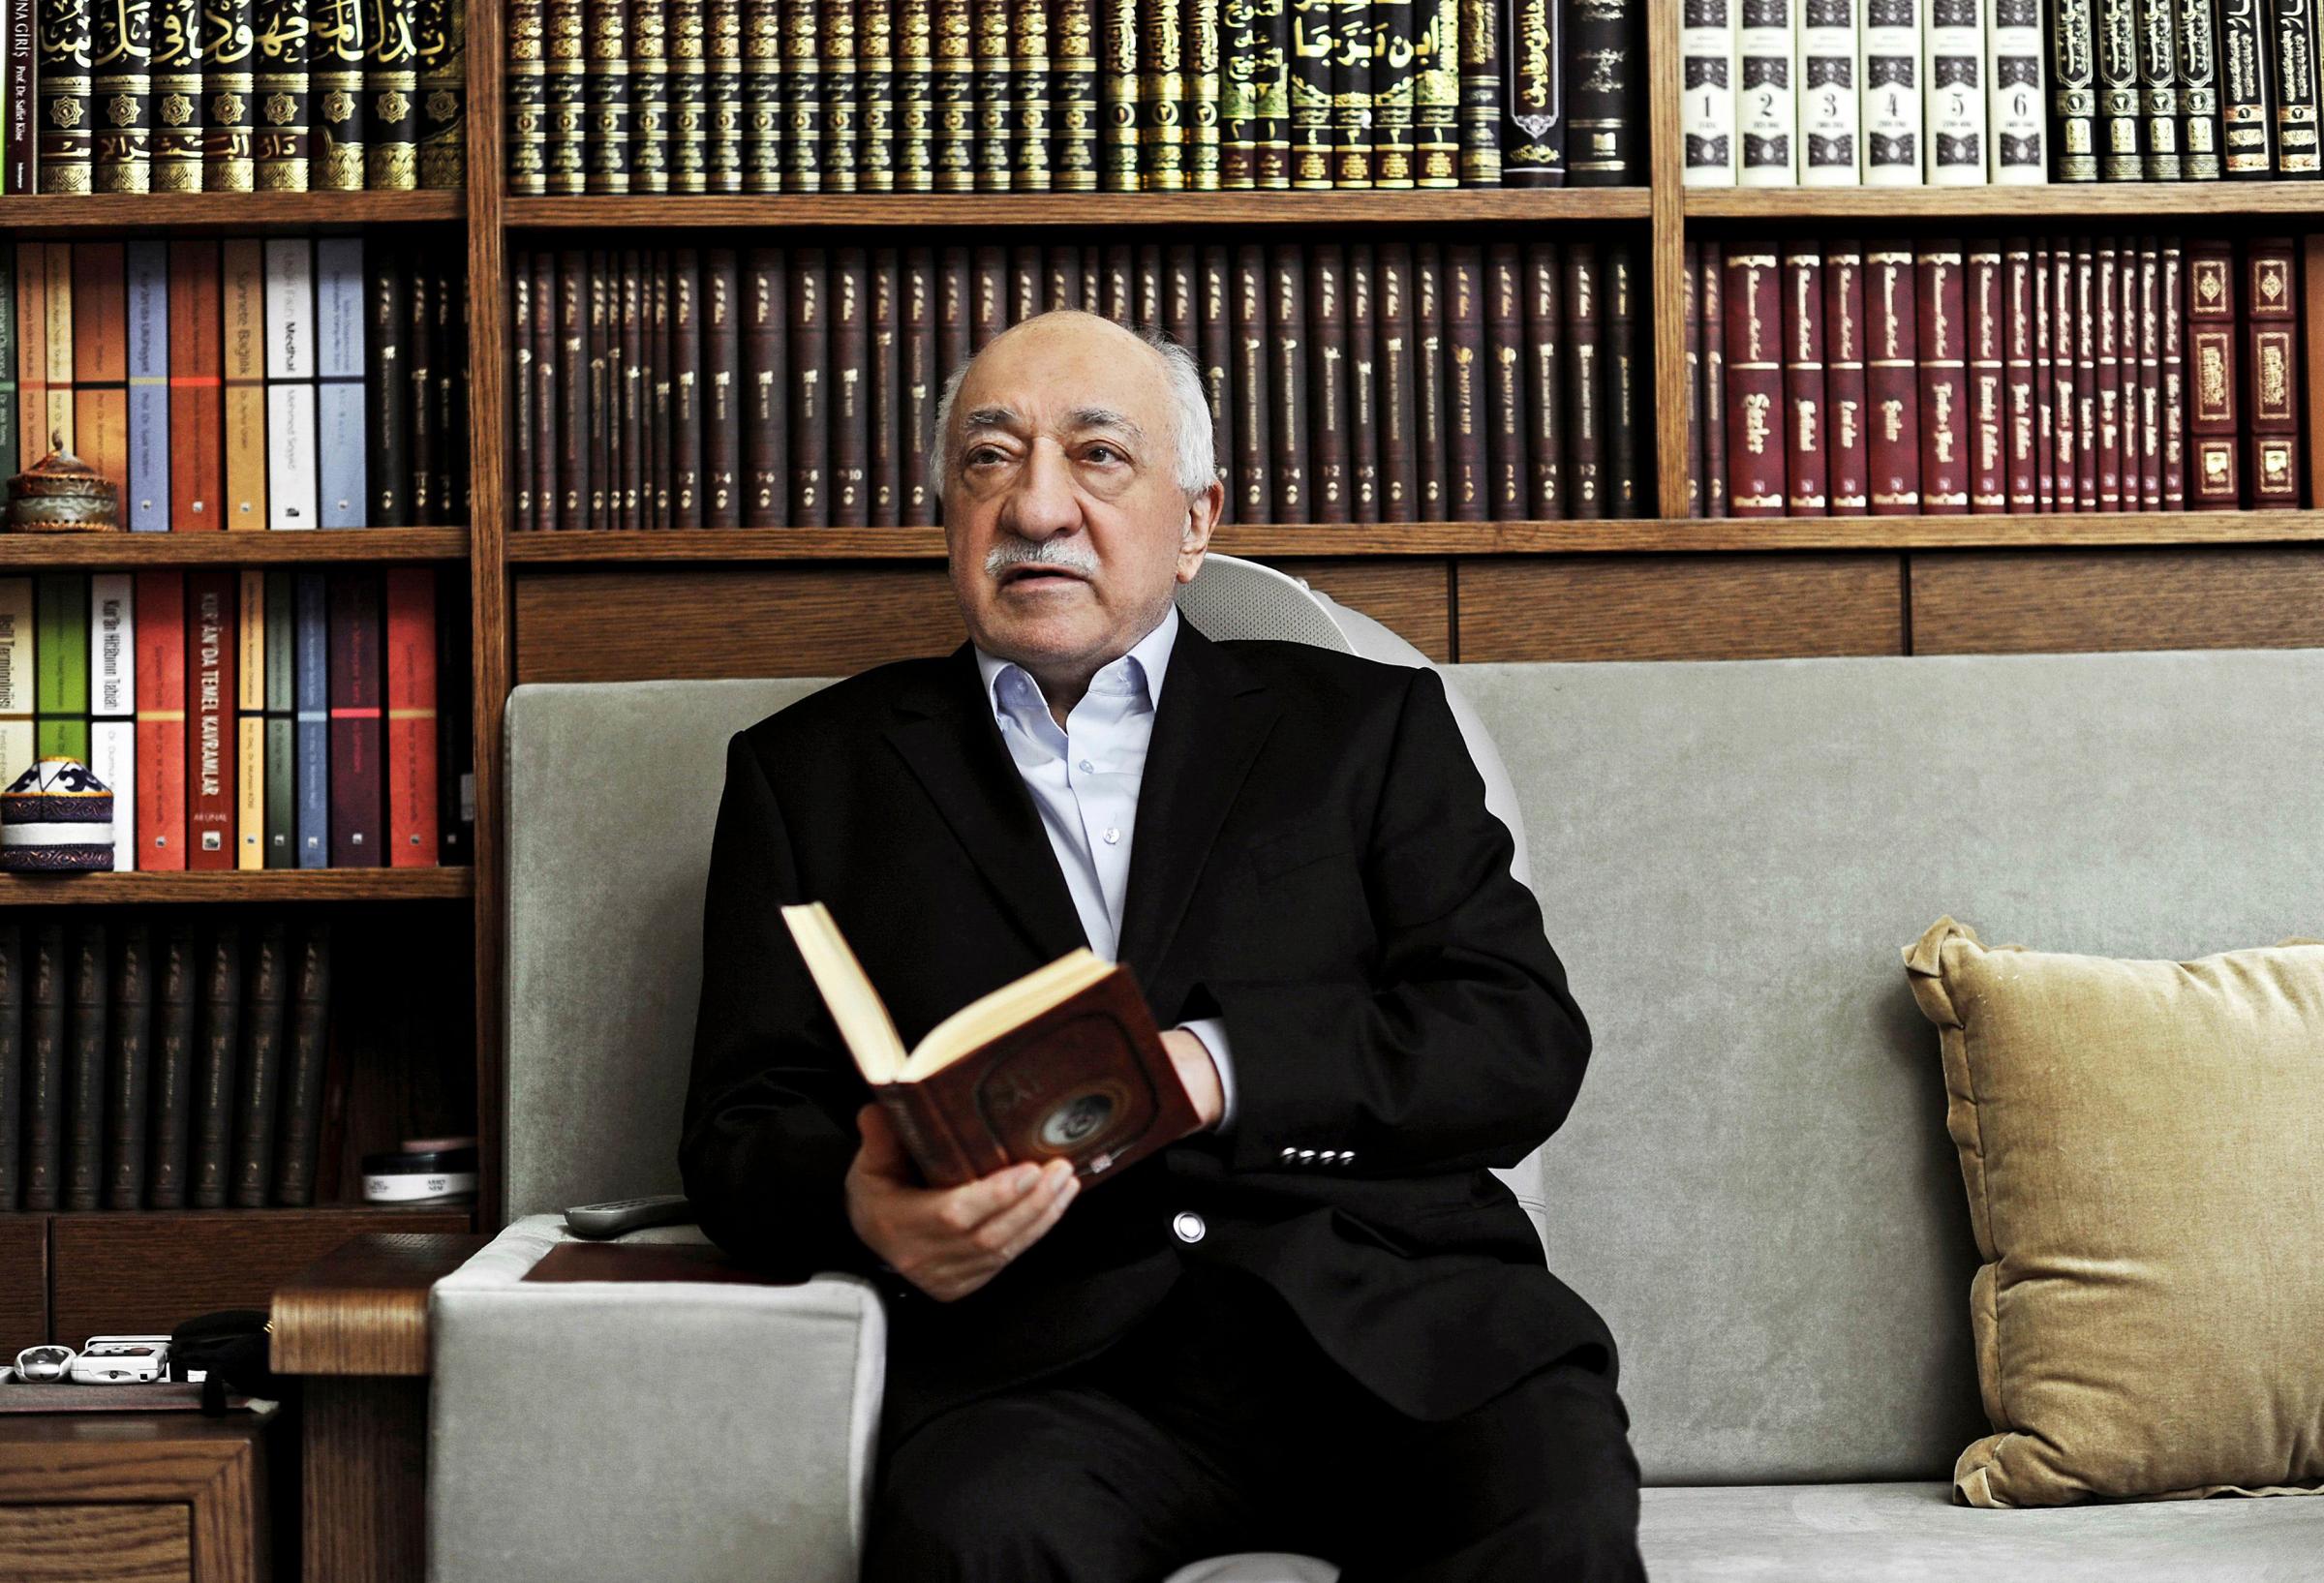 A file picture from March 15, 2014, shows Fethullah Gulen, an Islamic scholar and founder of the Gulen movement, during an interview at his residence in Pennsylvania.